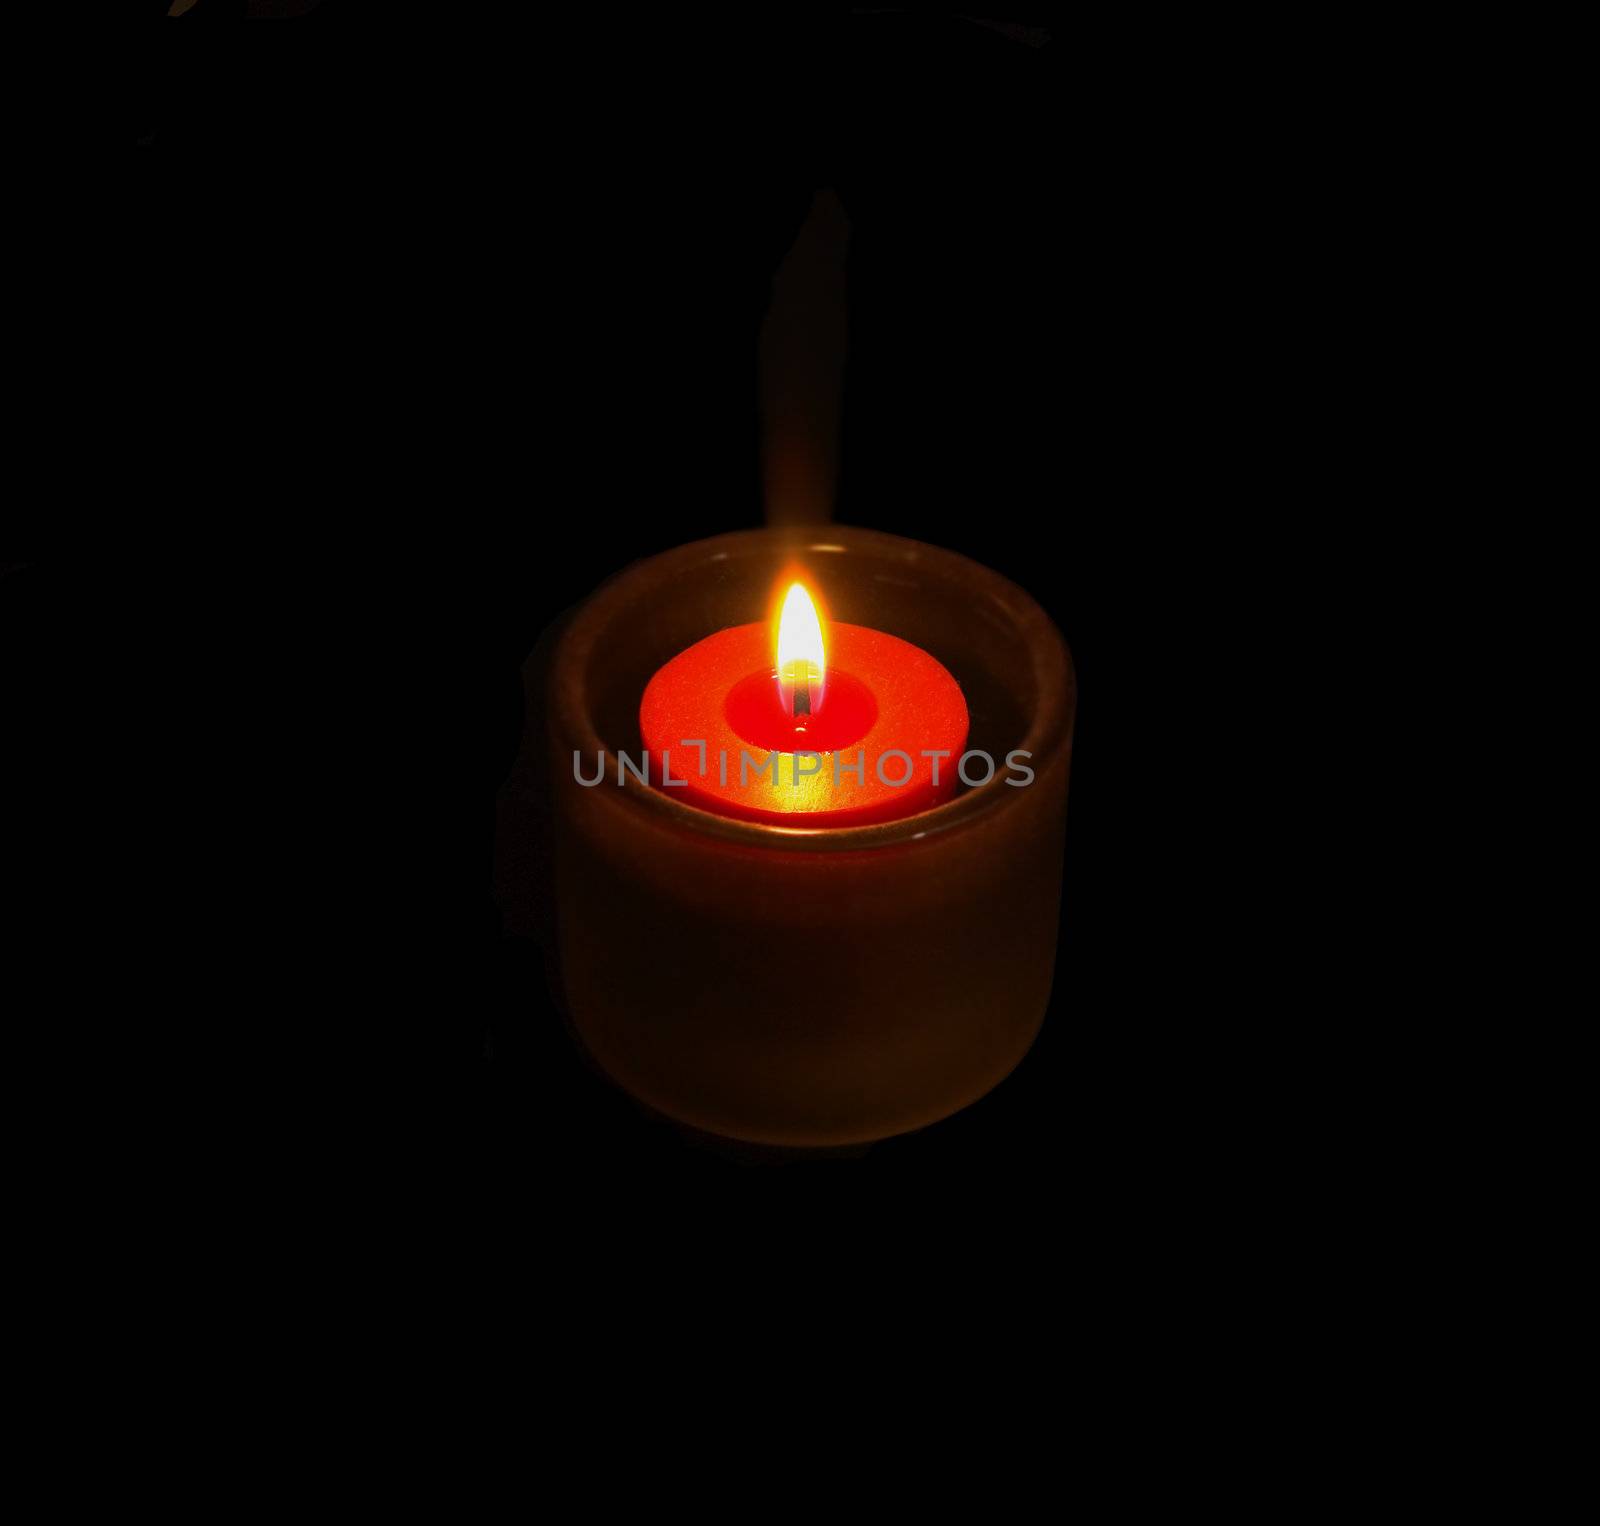 candle glowing on the dark